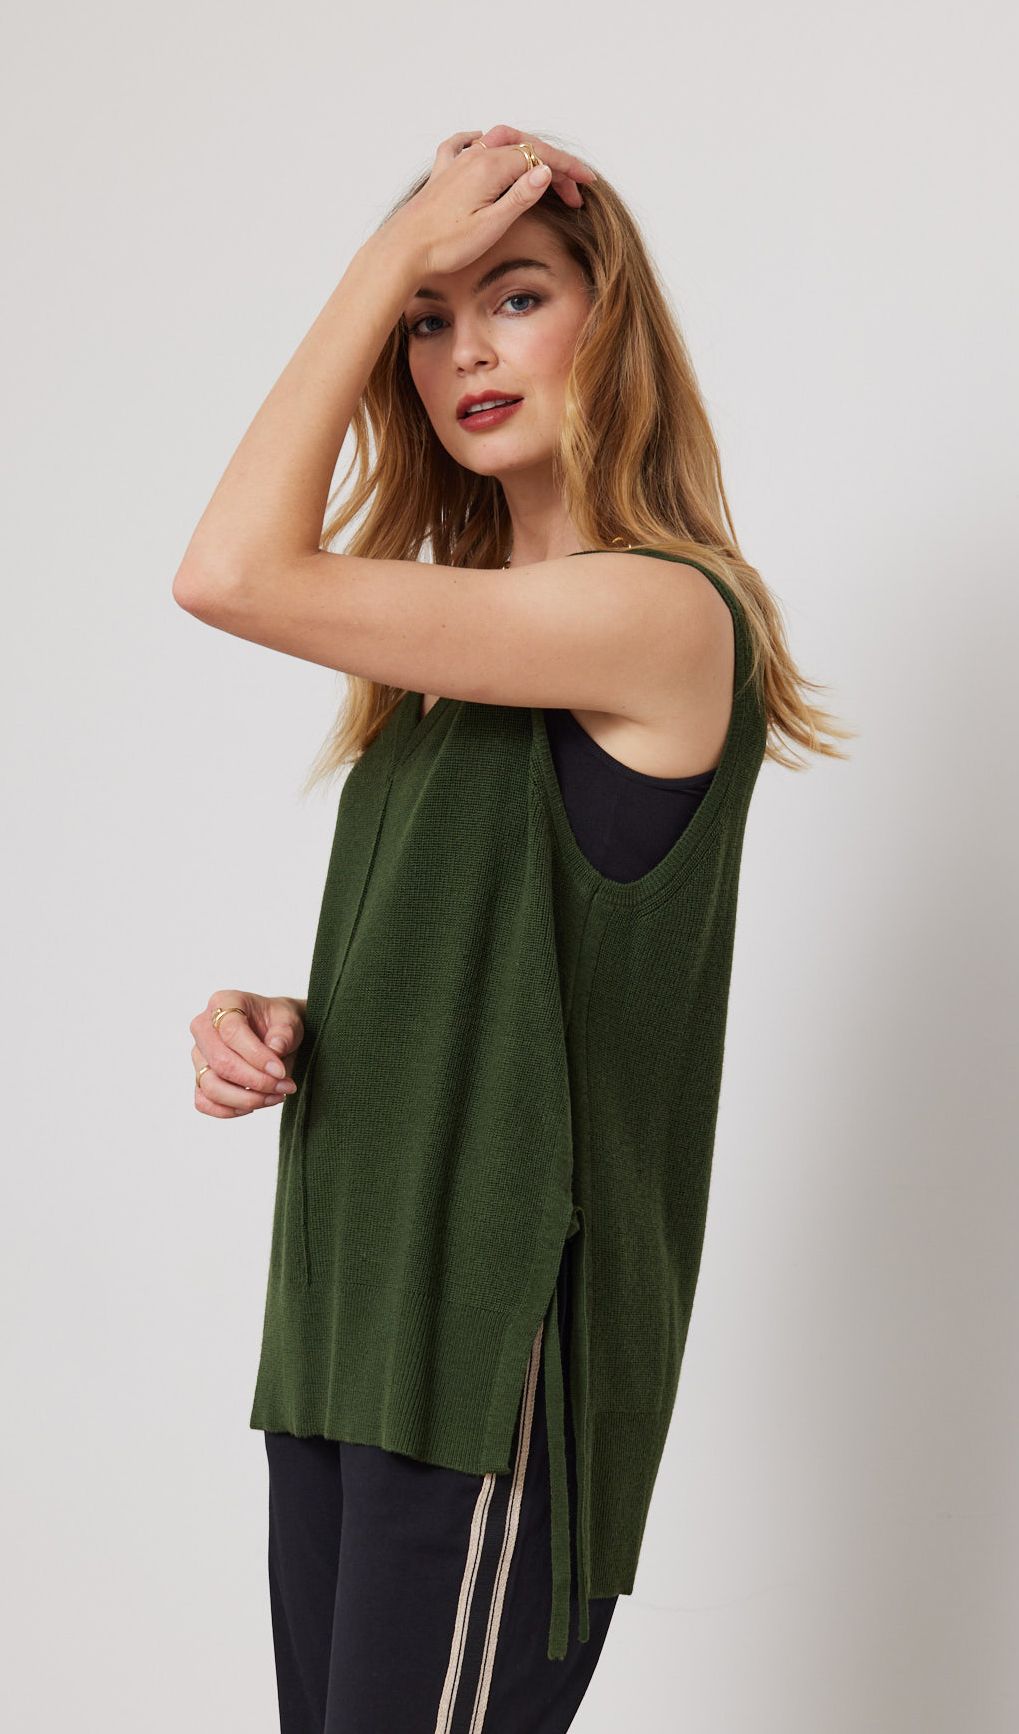 DUO AVICE KNIT VEST - OLIVE - THE VOGUE STORE